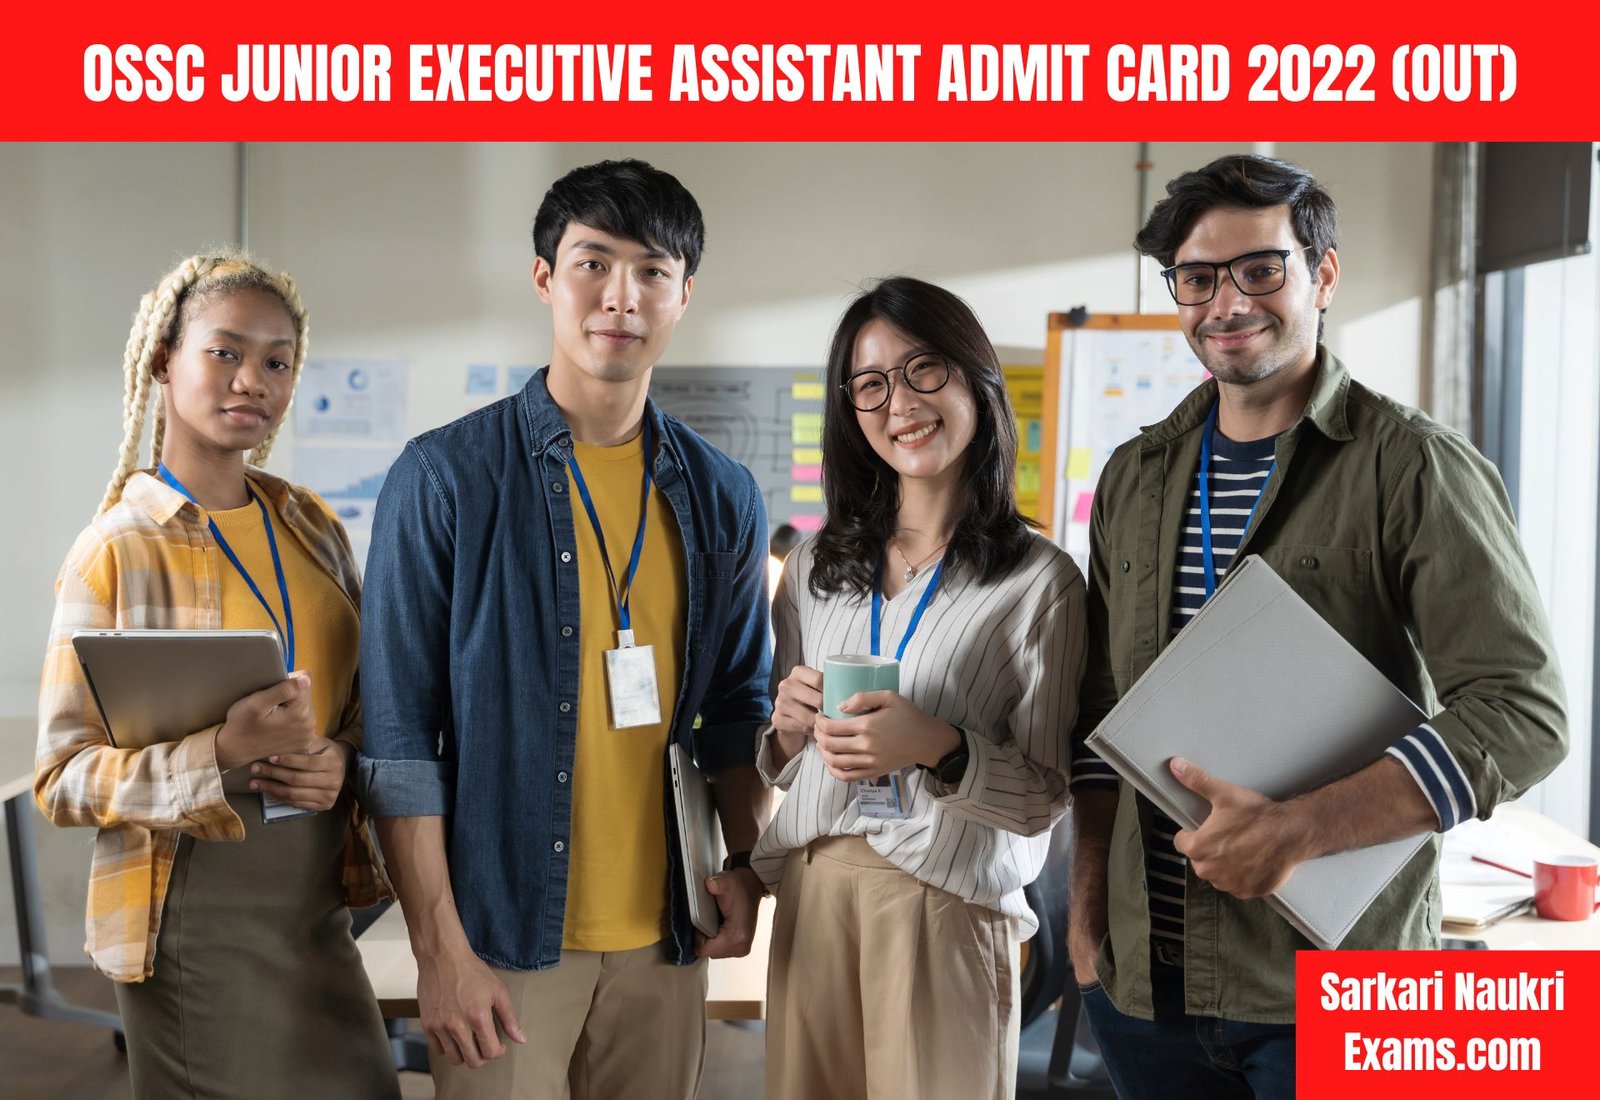 OSSC Junior Executive Assistant Admit Card 2022 (OUT) | Download Link, Exam Date